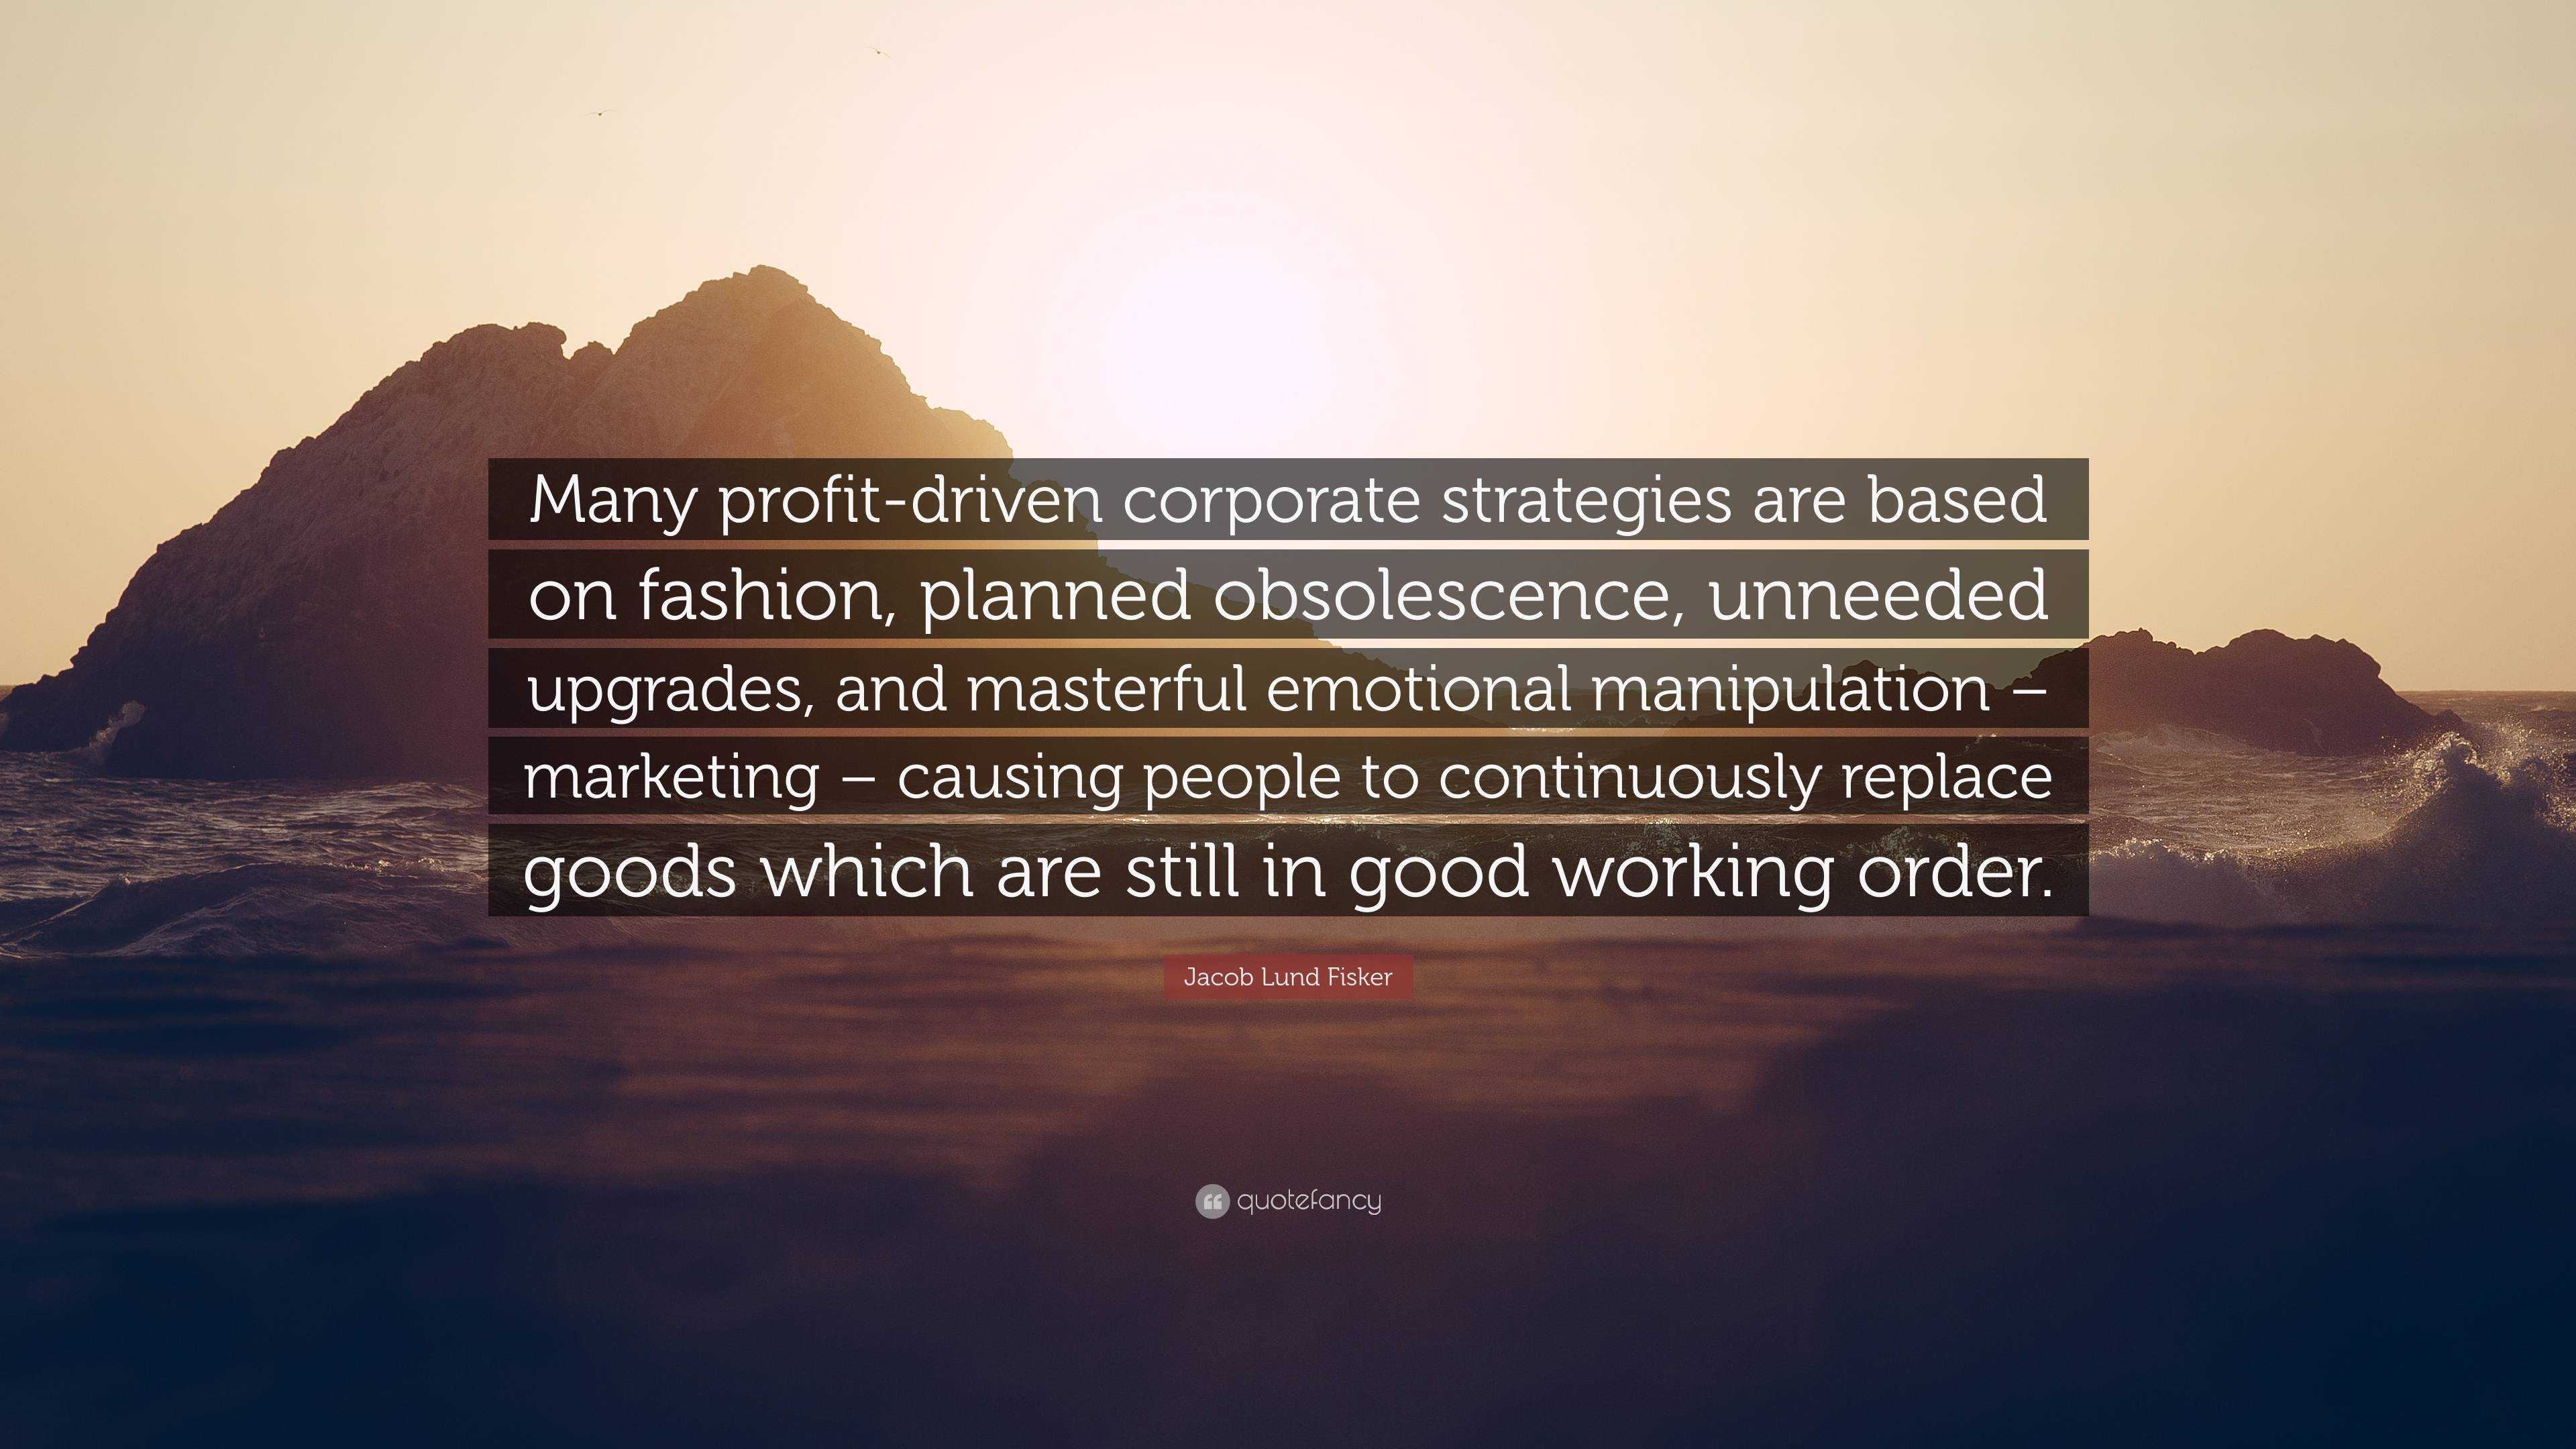 Jacob Lund Fisker Quote: “Many profit-driven corporate strategies are ...